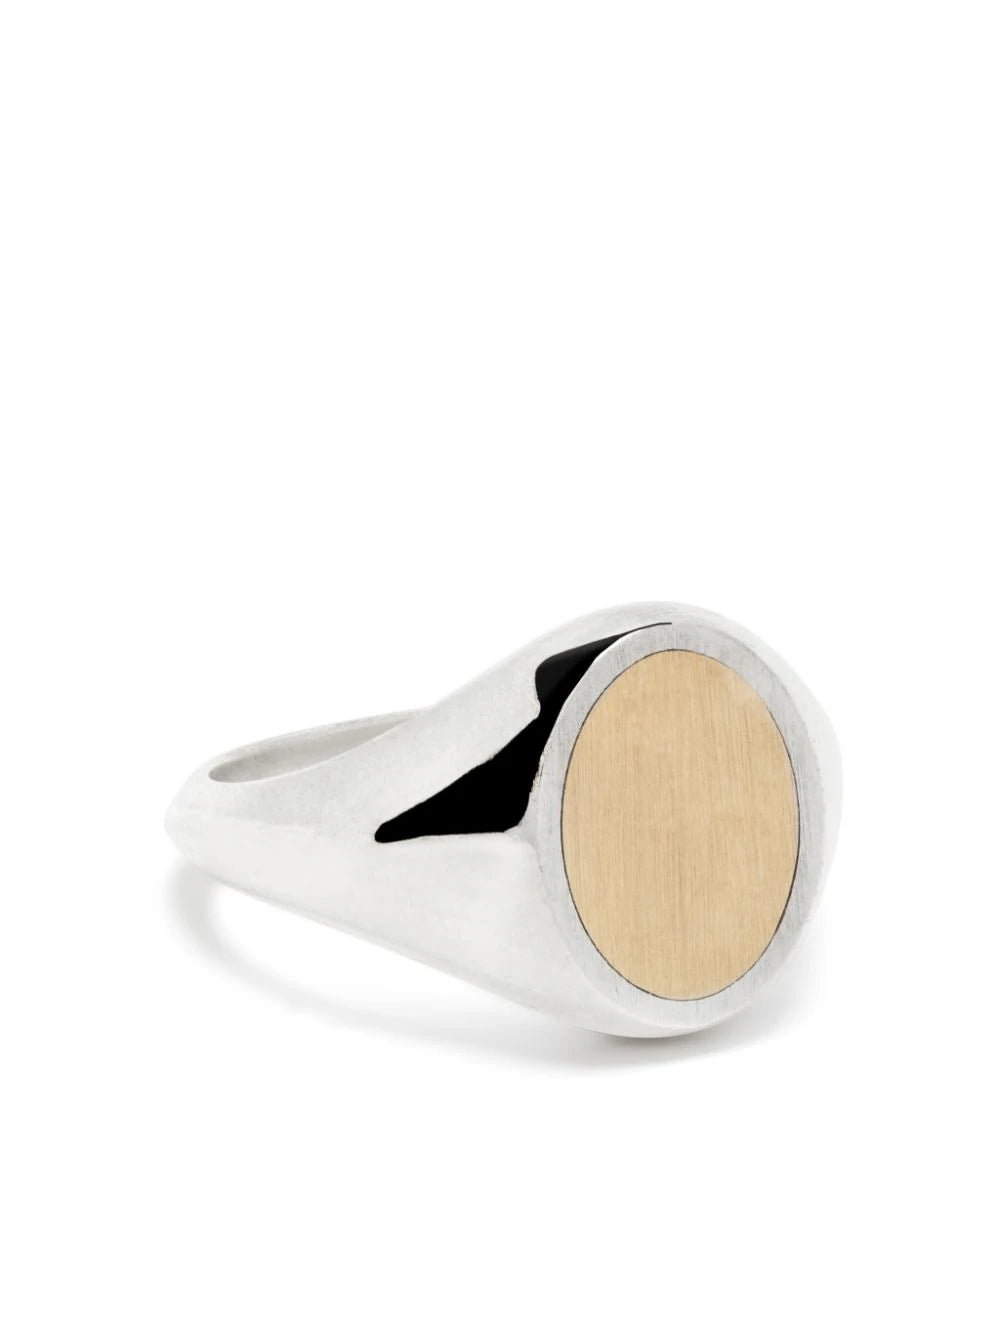 MAOR MEEK RING OVAL TOP IN SILVER AND YELLOW GOLD